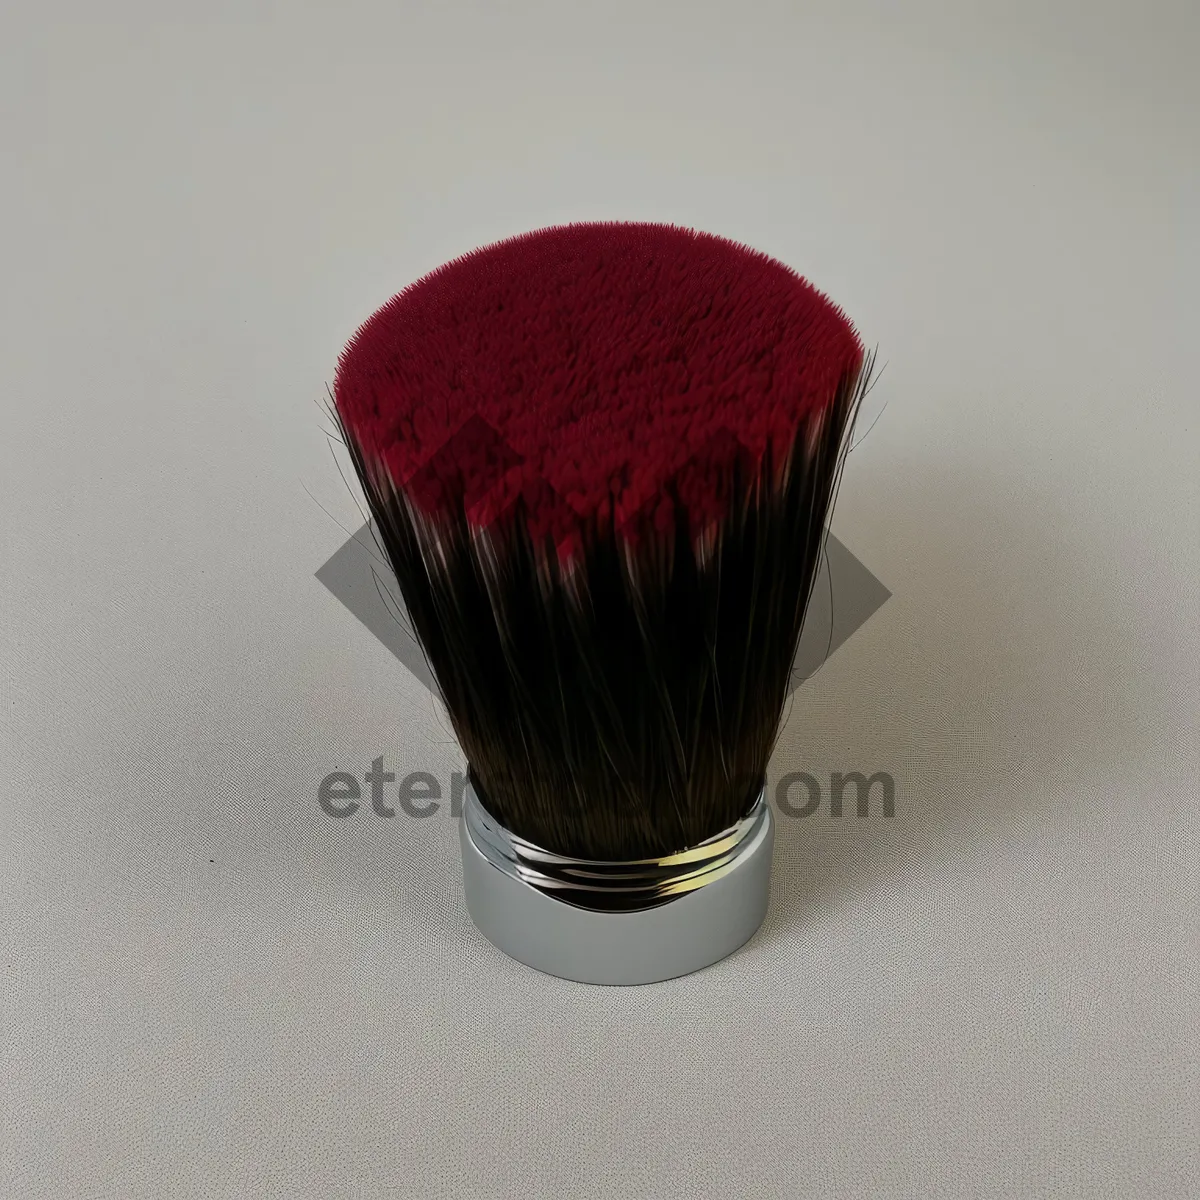 Picture of Versatile Makeup Applicator: Brushing on Color and Powder